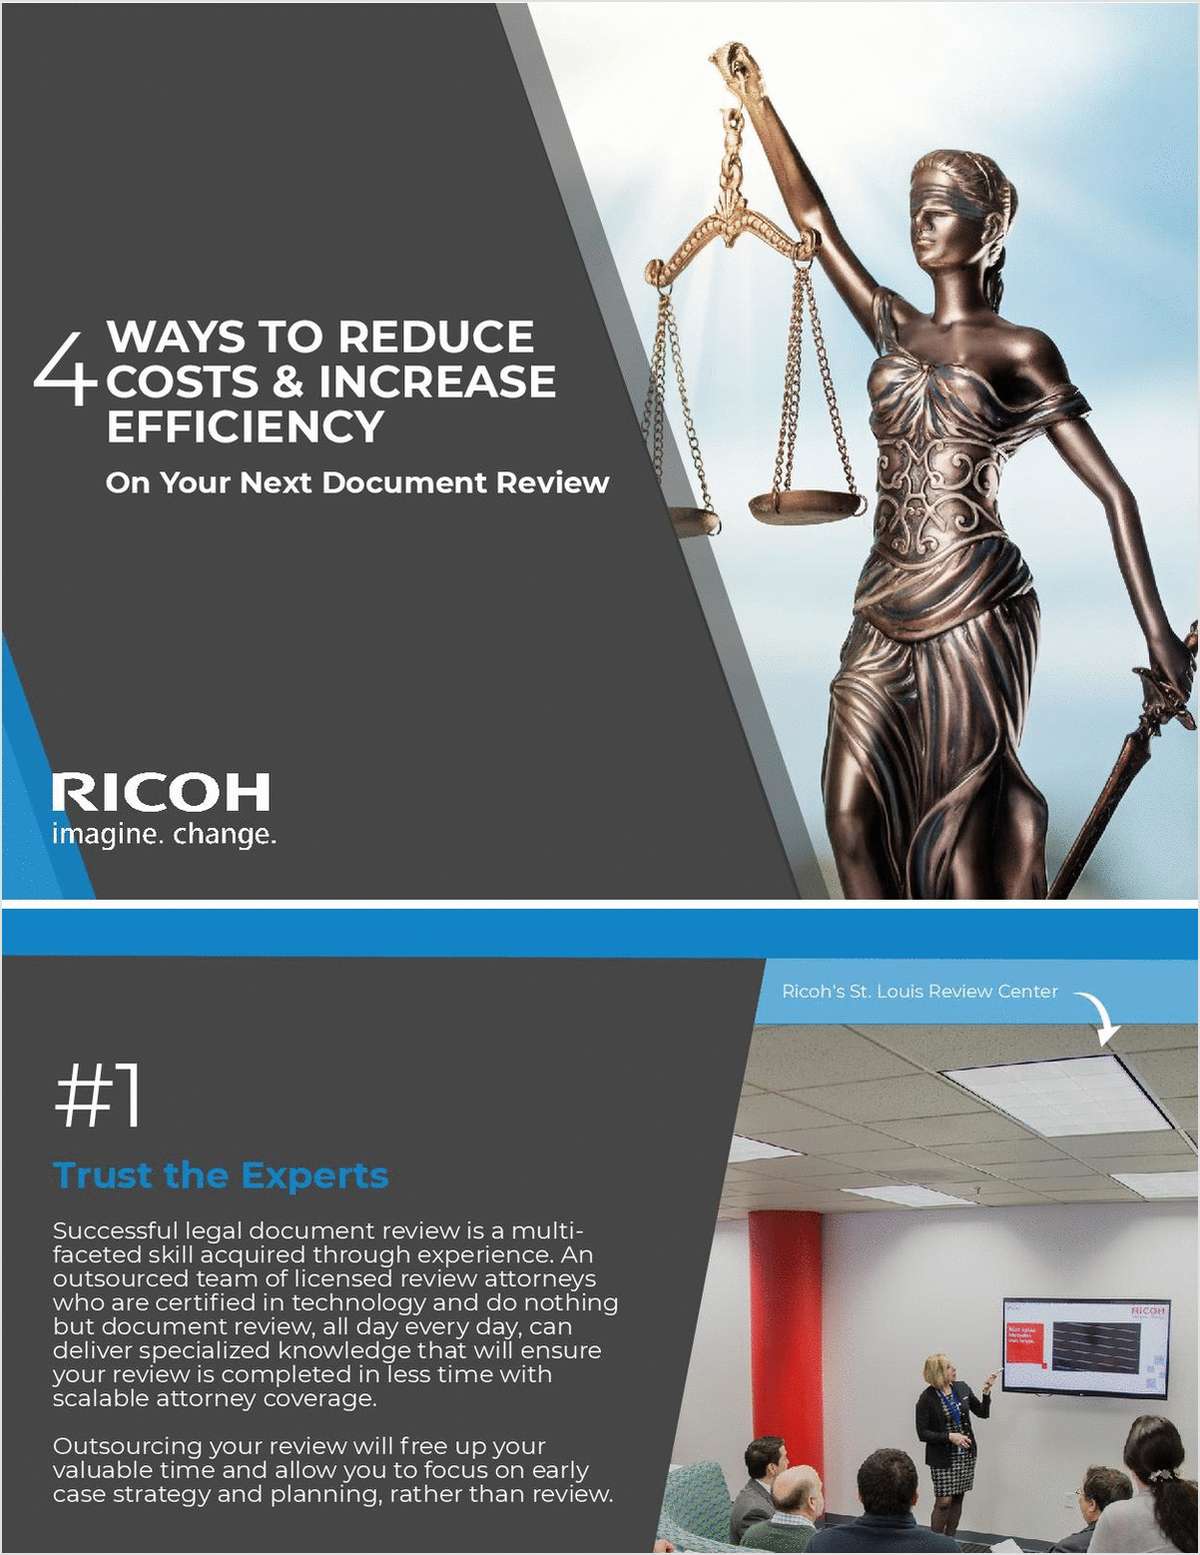 4 Ways to Reduce Costs & Increase Efficiency On Your Next Document Review